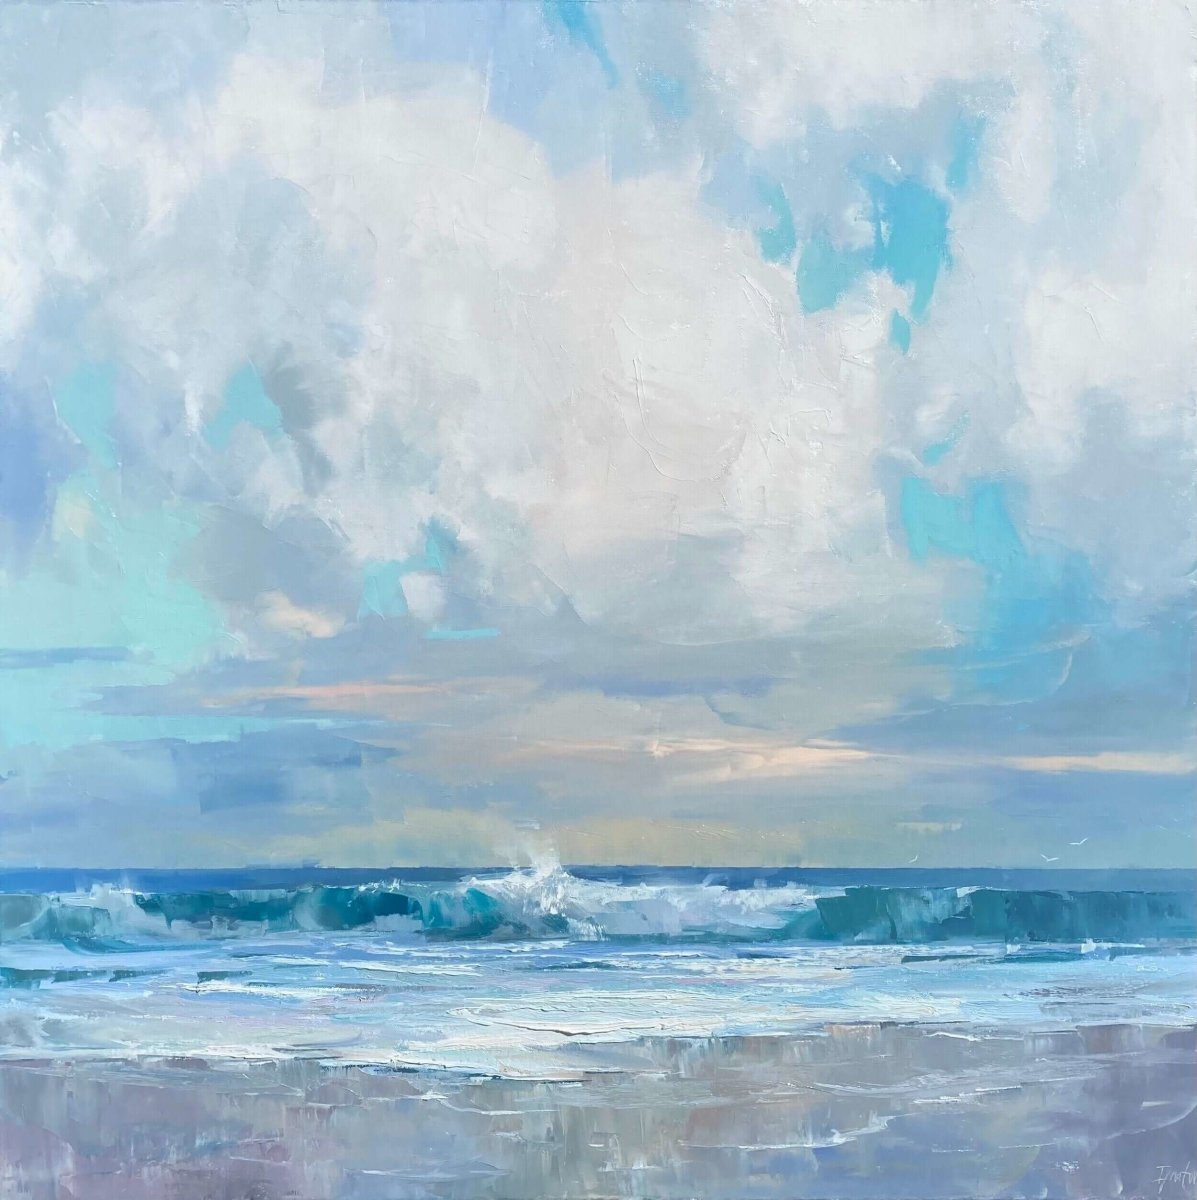 Morning Waves by Ignat Ignatov at LePrince Galleries